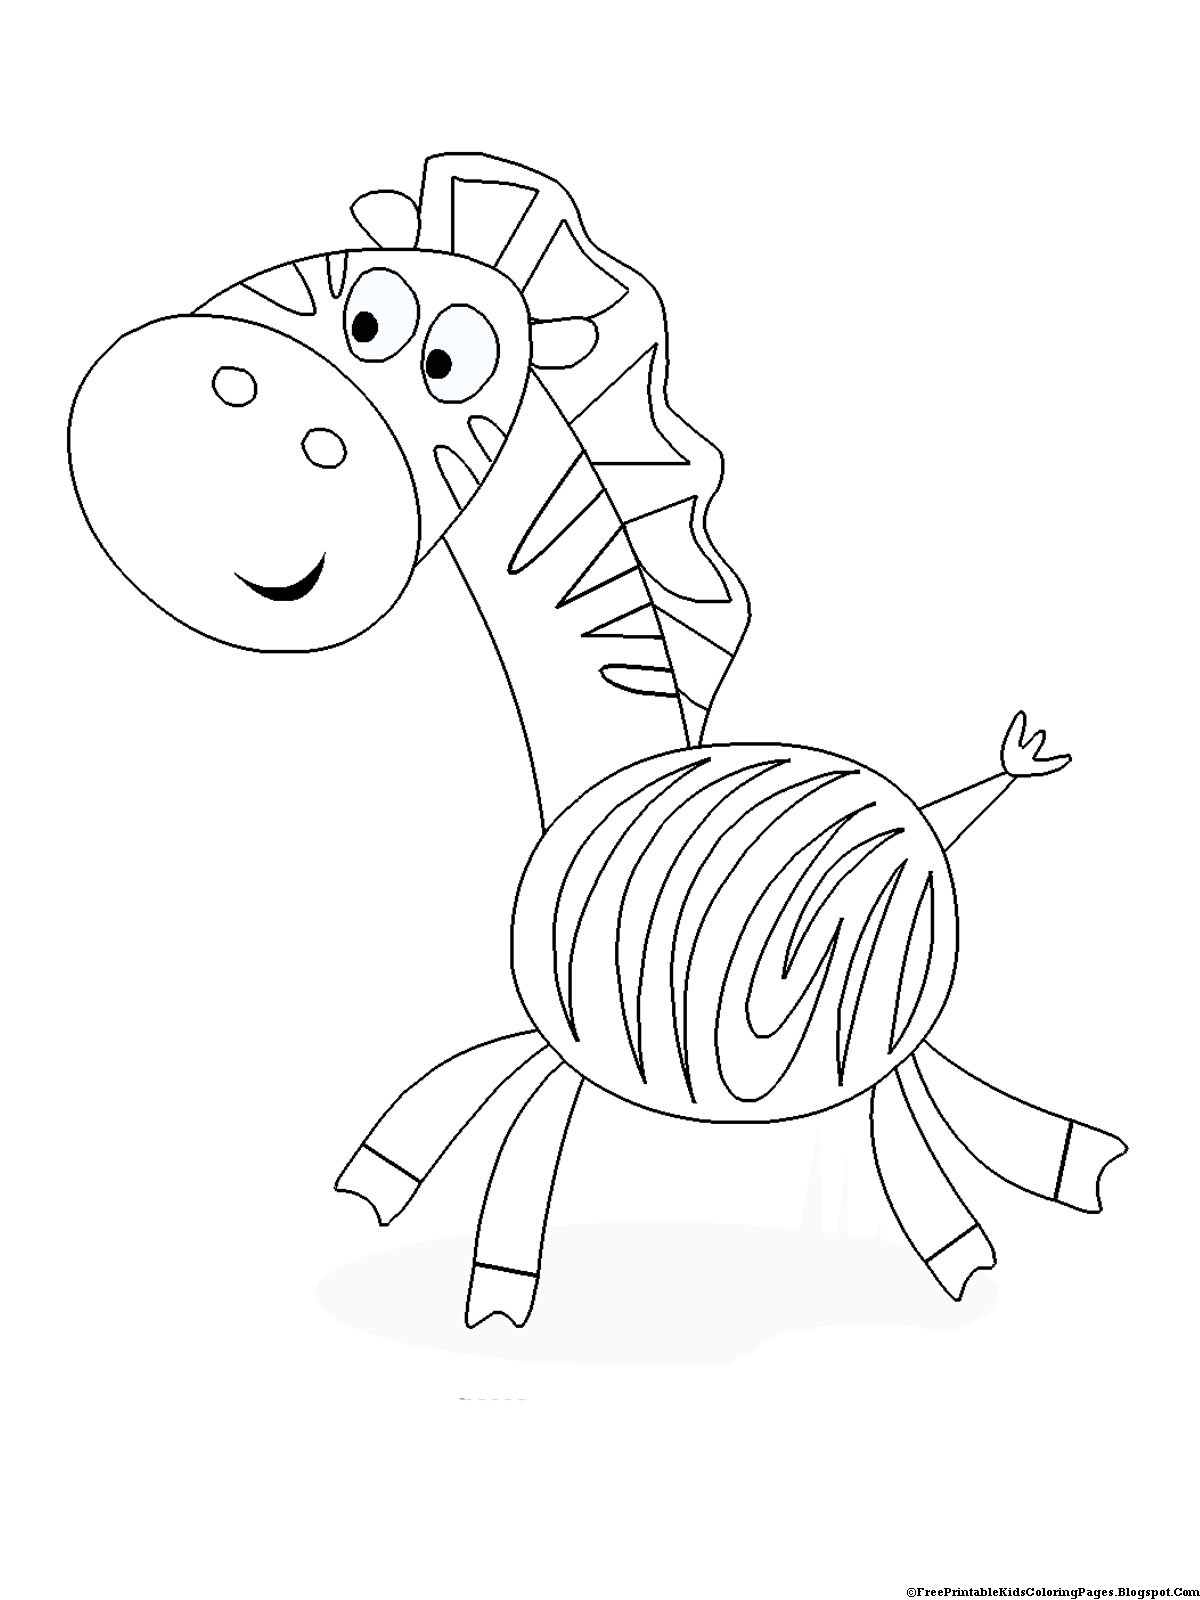 Coloring For Kids Online
 Zebra Coloring Pages Free Printable Kids Coloring Pages